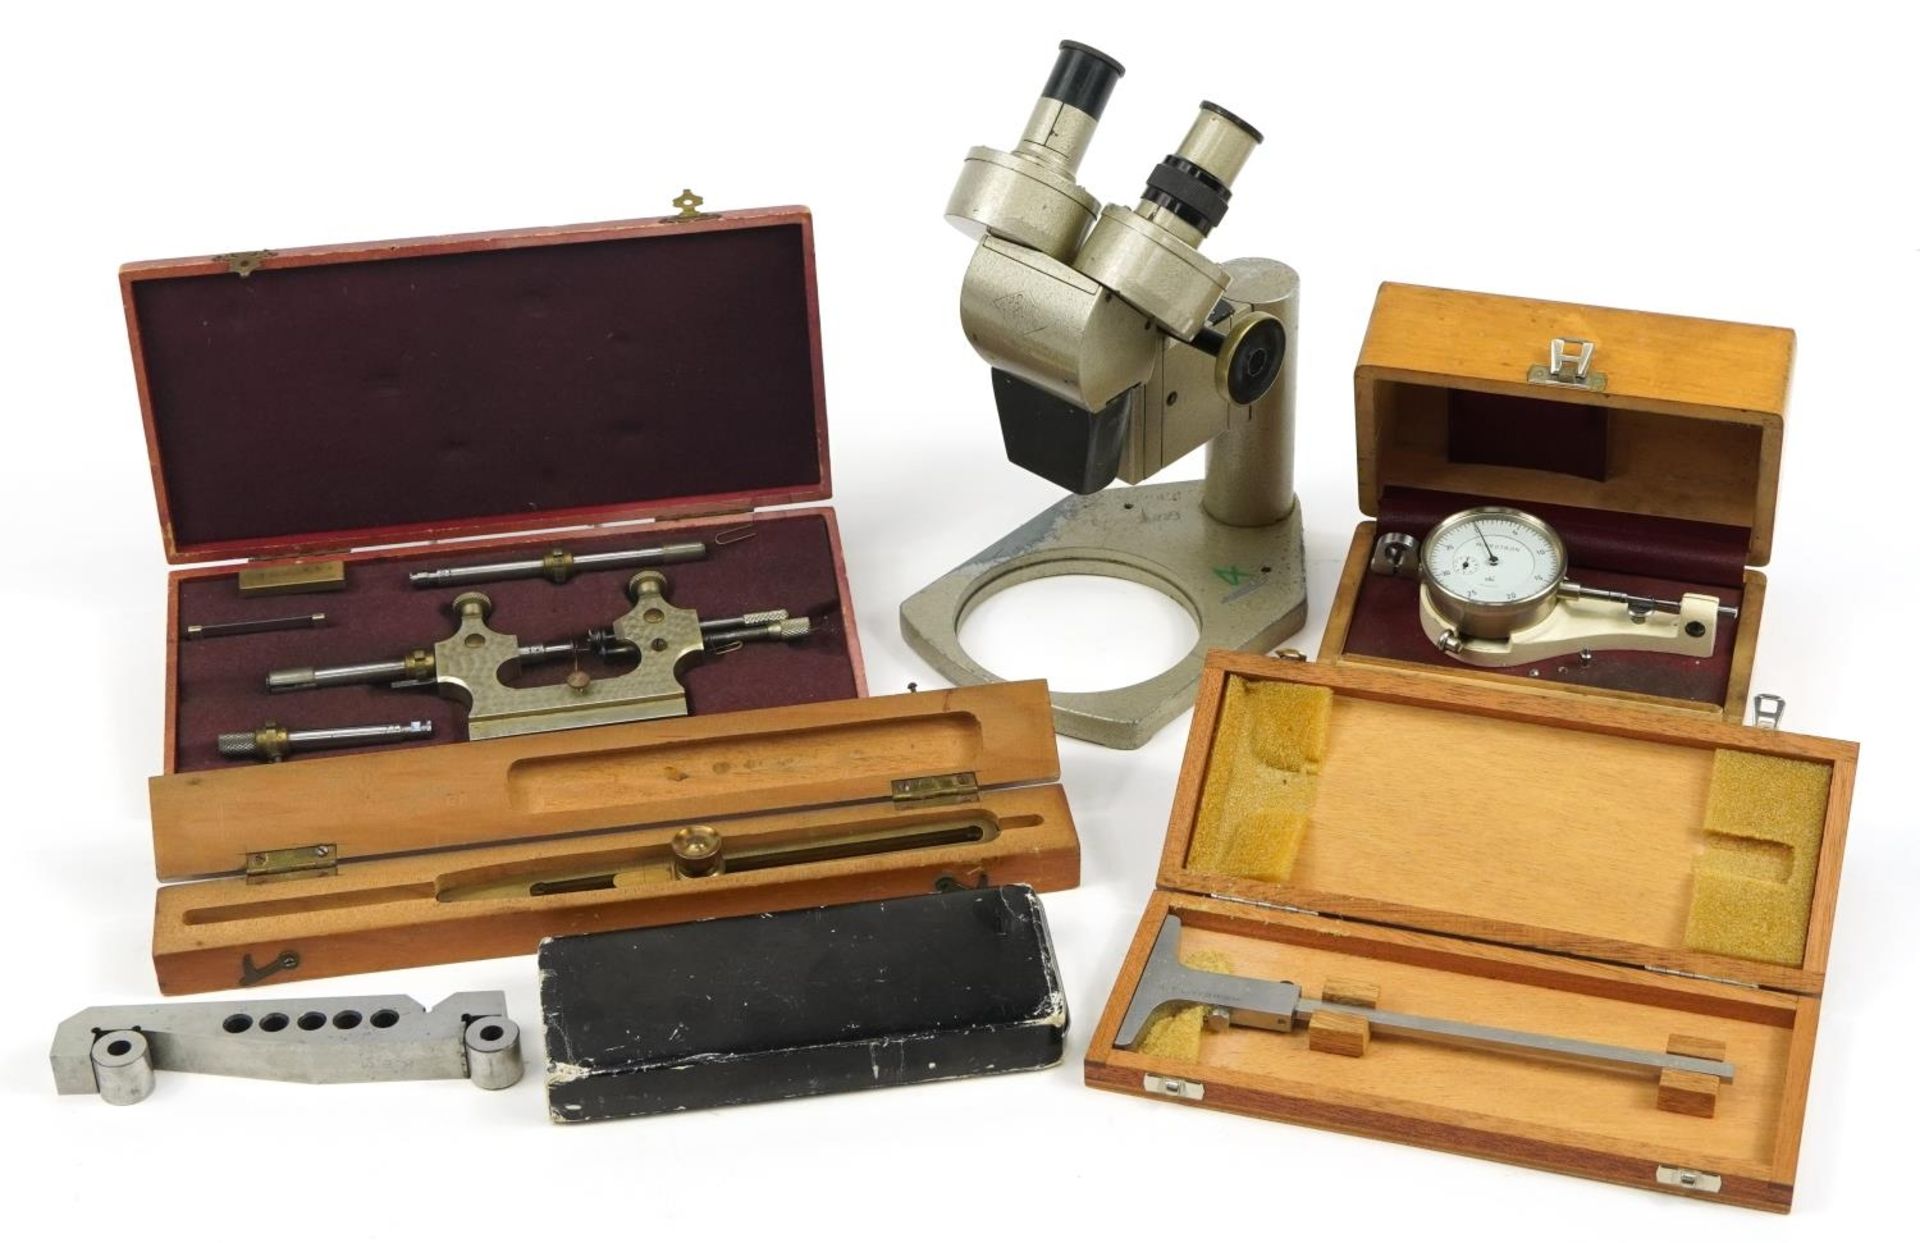 Vintage optical and precision instruments including a Tour a Pivoter watchmaker's lathe with case,